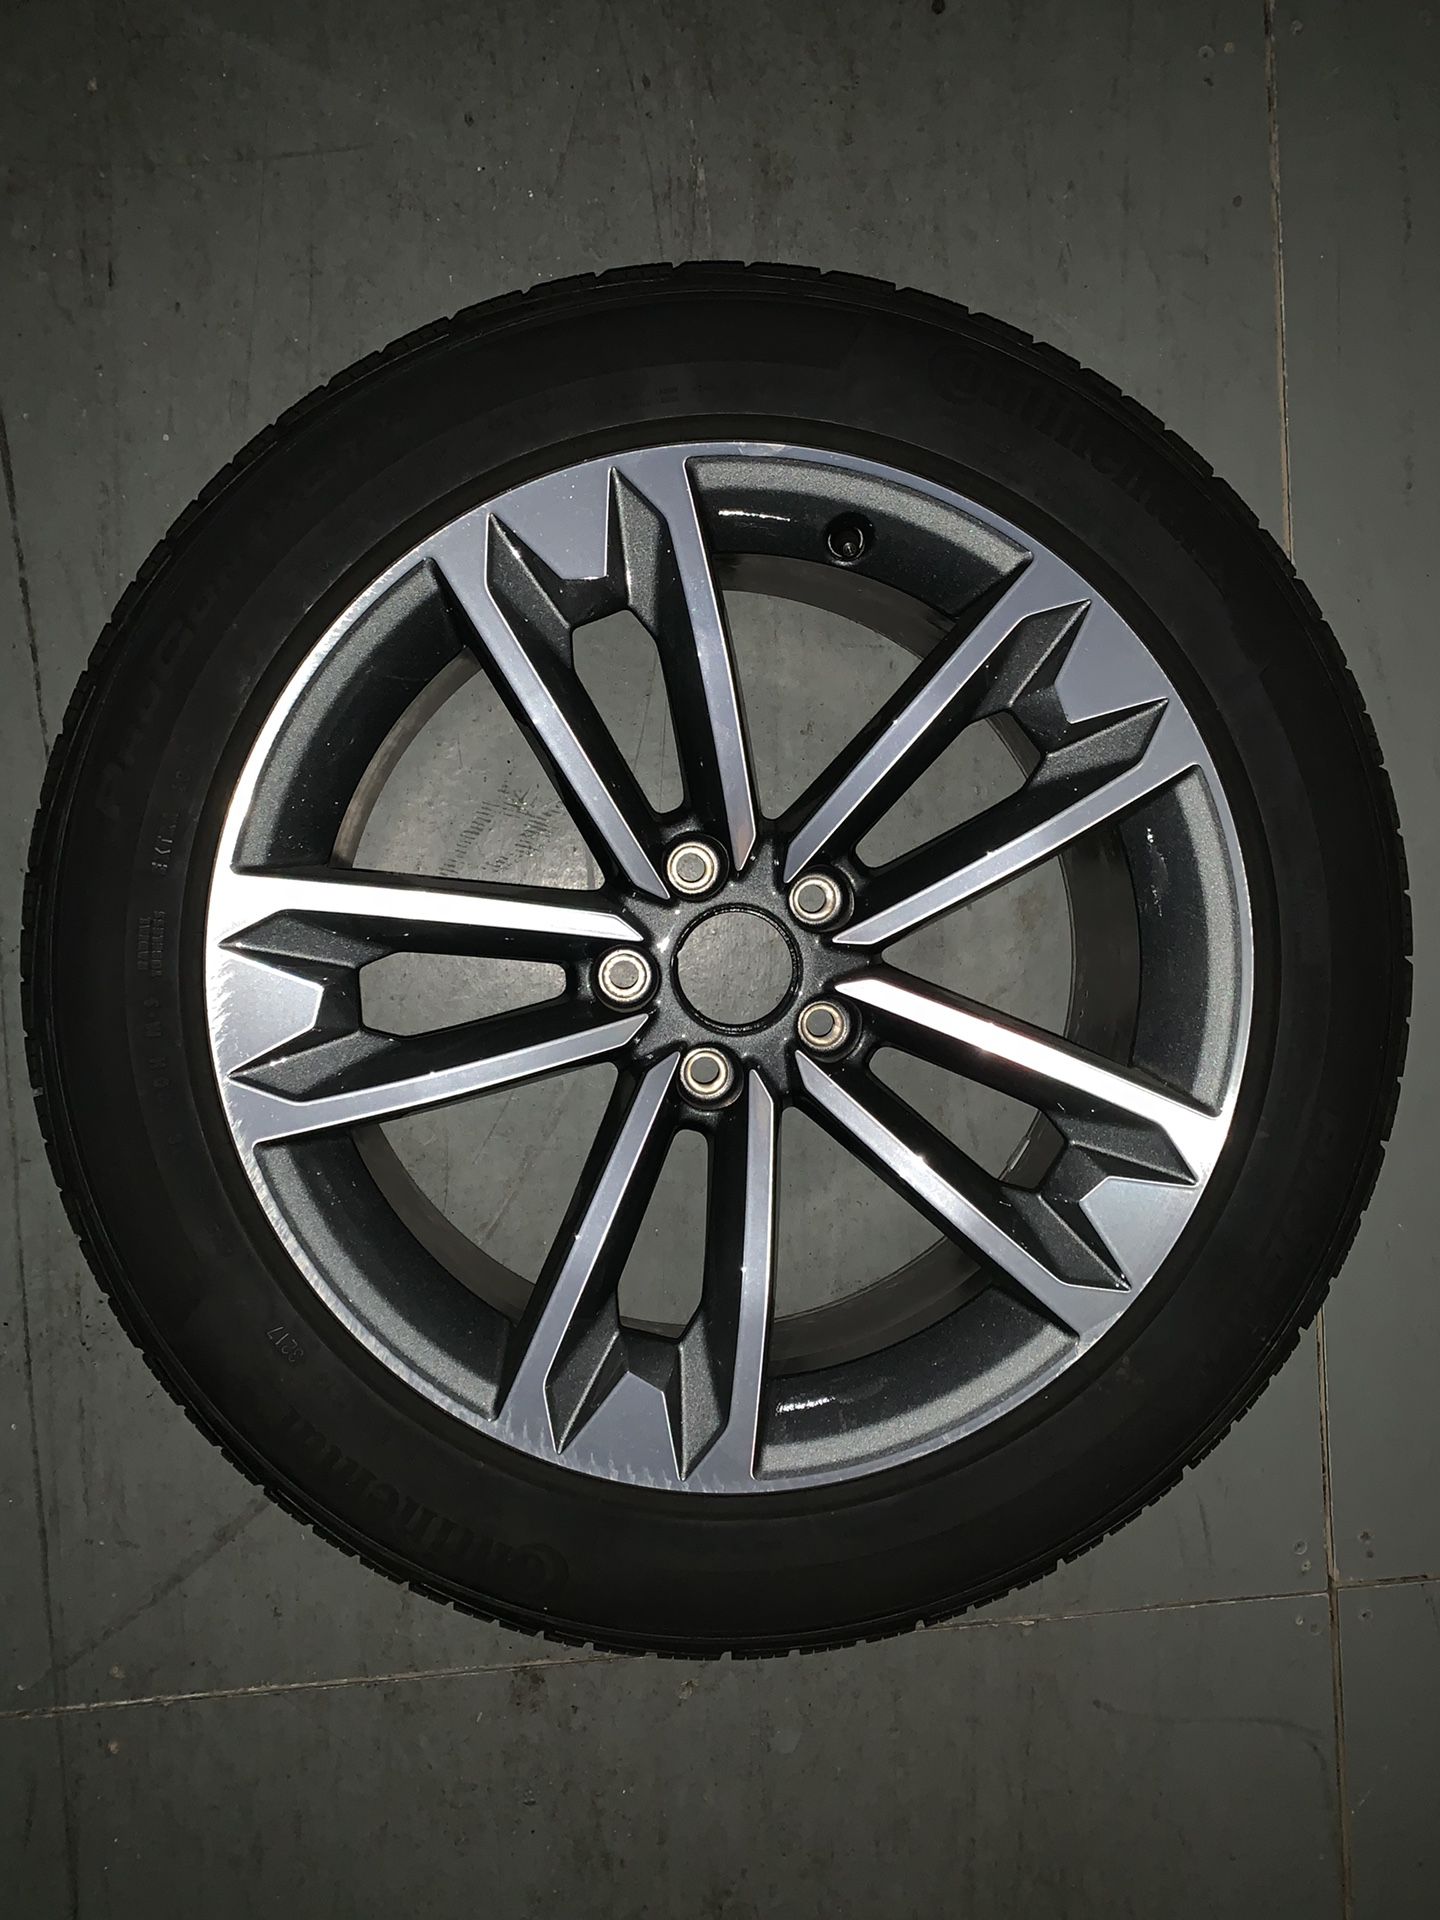 Audi A4 rims and tires